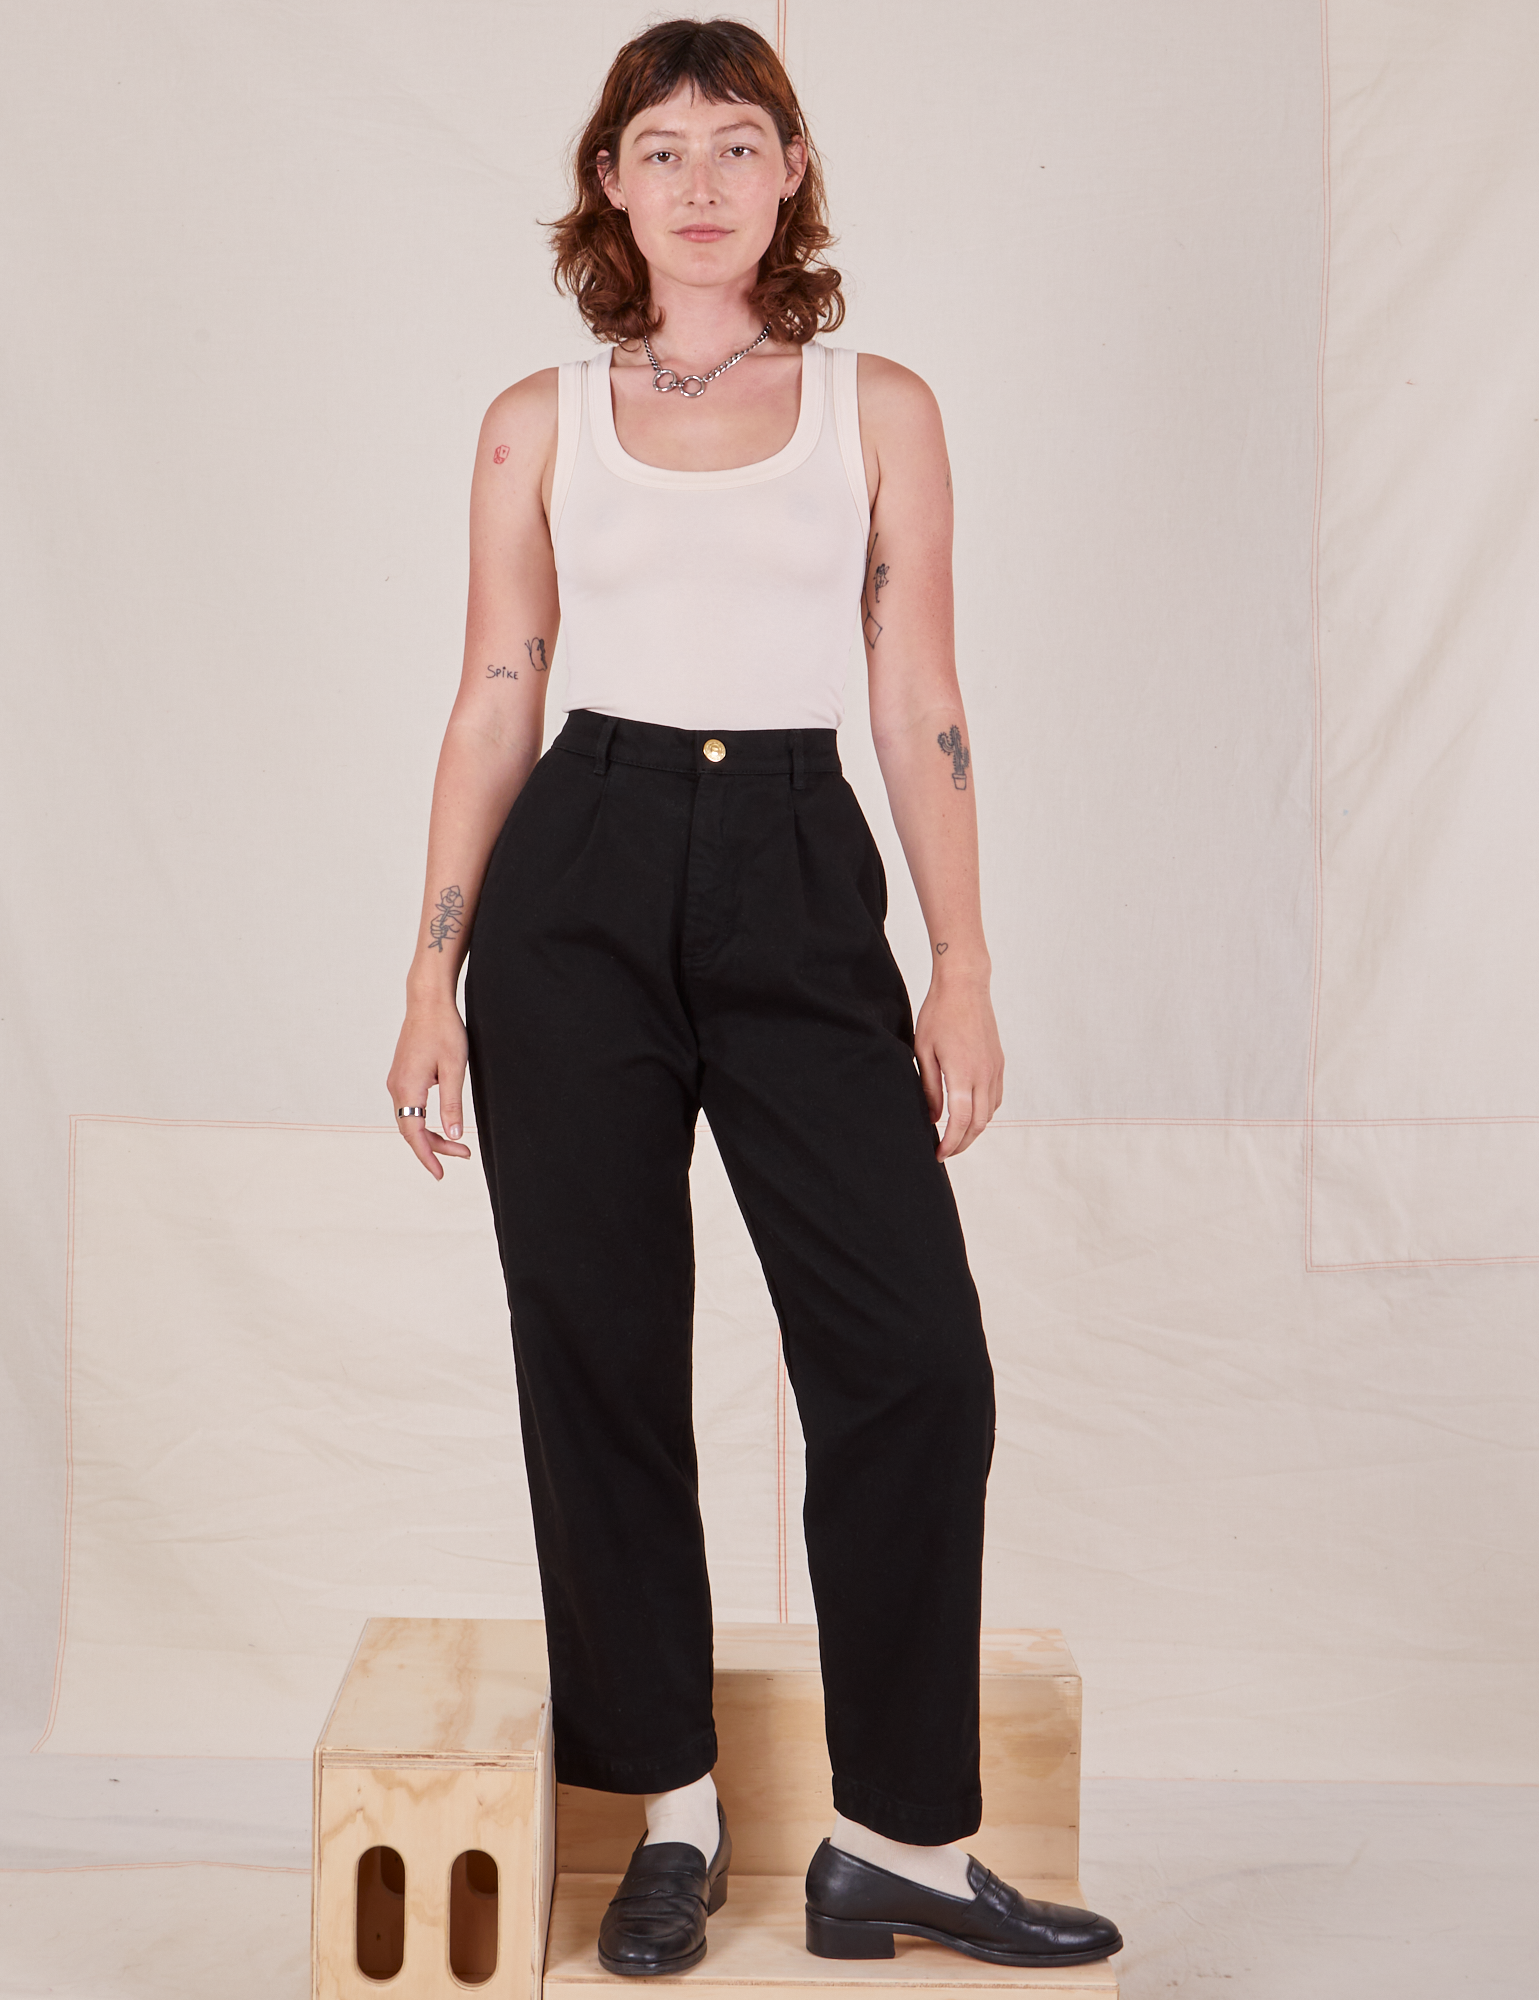 Alex is 5&#39;8&quot; and wearing XXS Denim Trouser Jeans in Black paired with a vintage off-white Tank Top